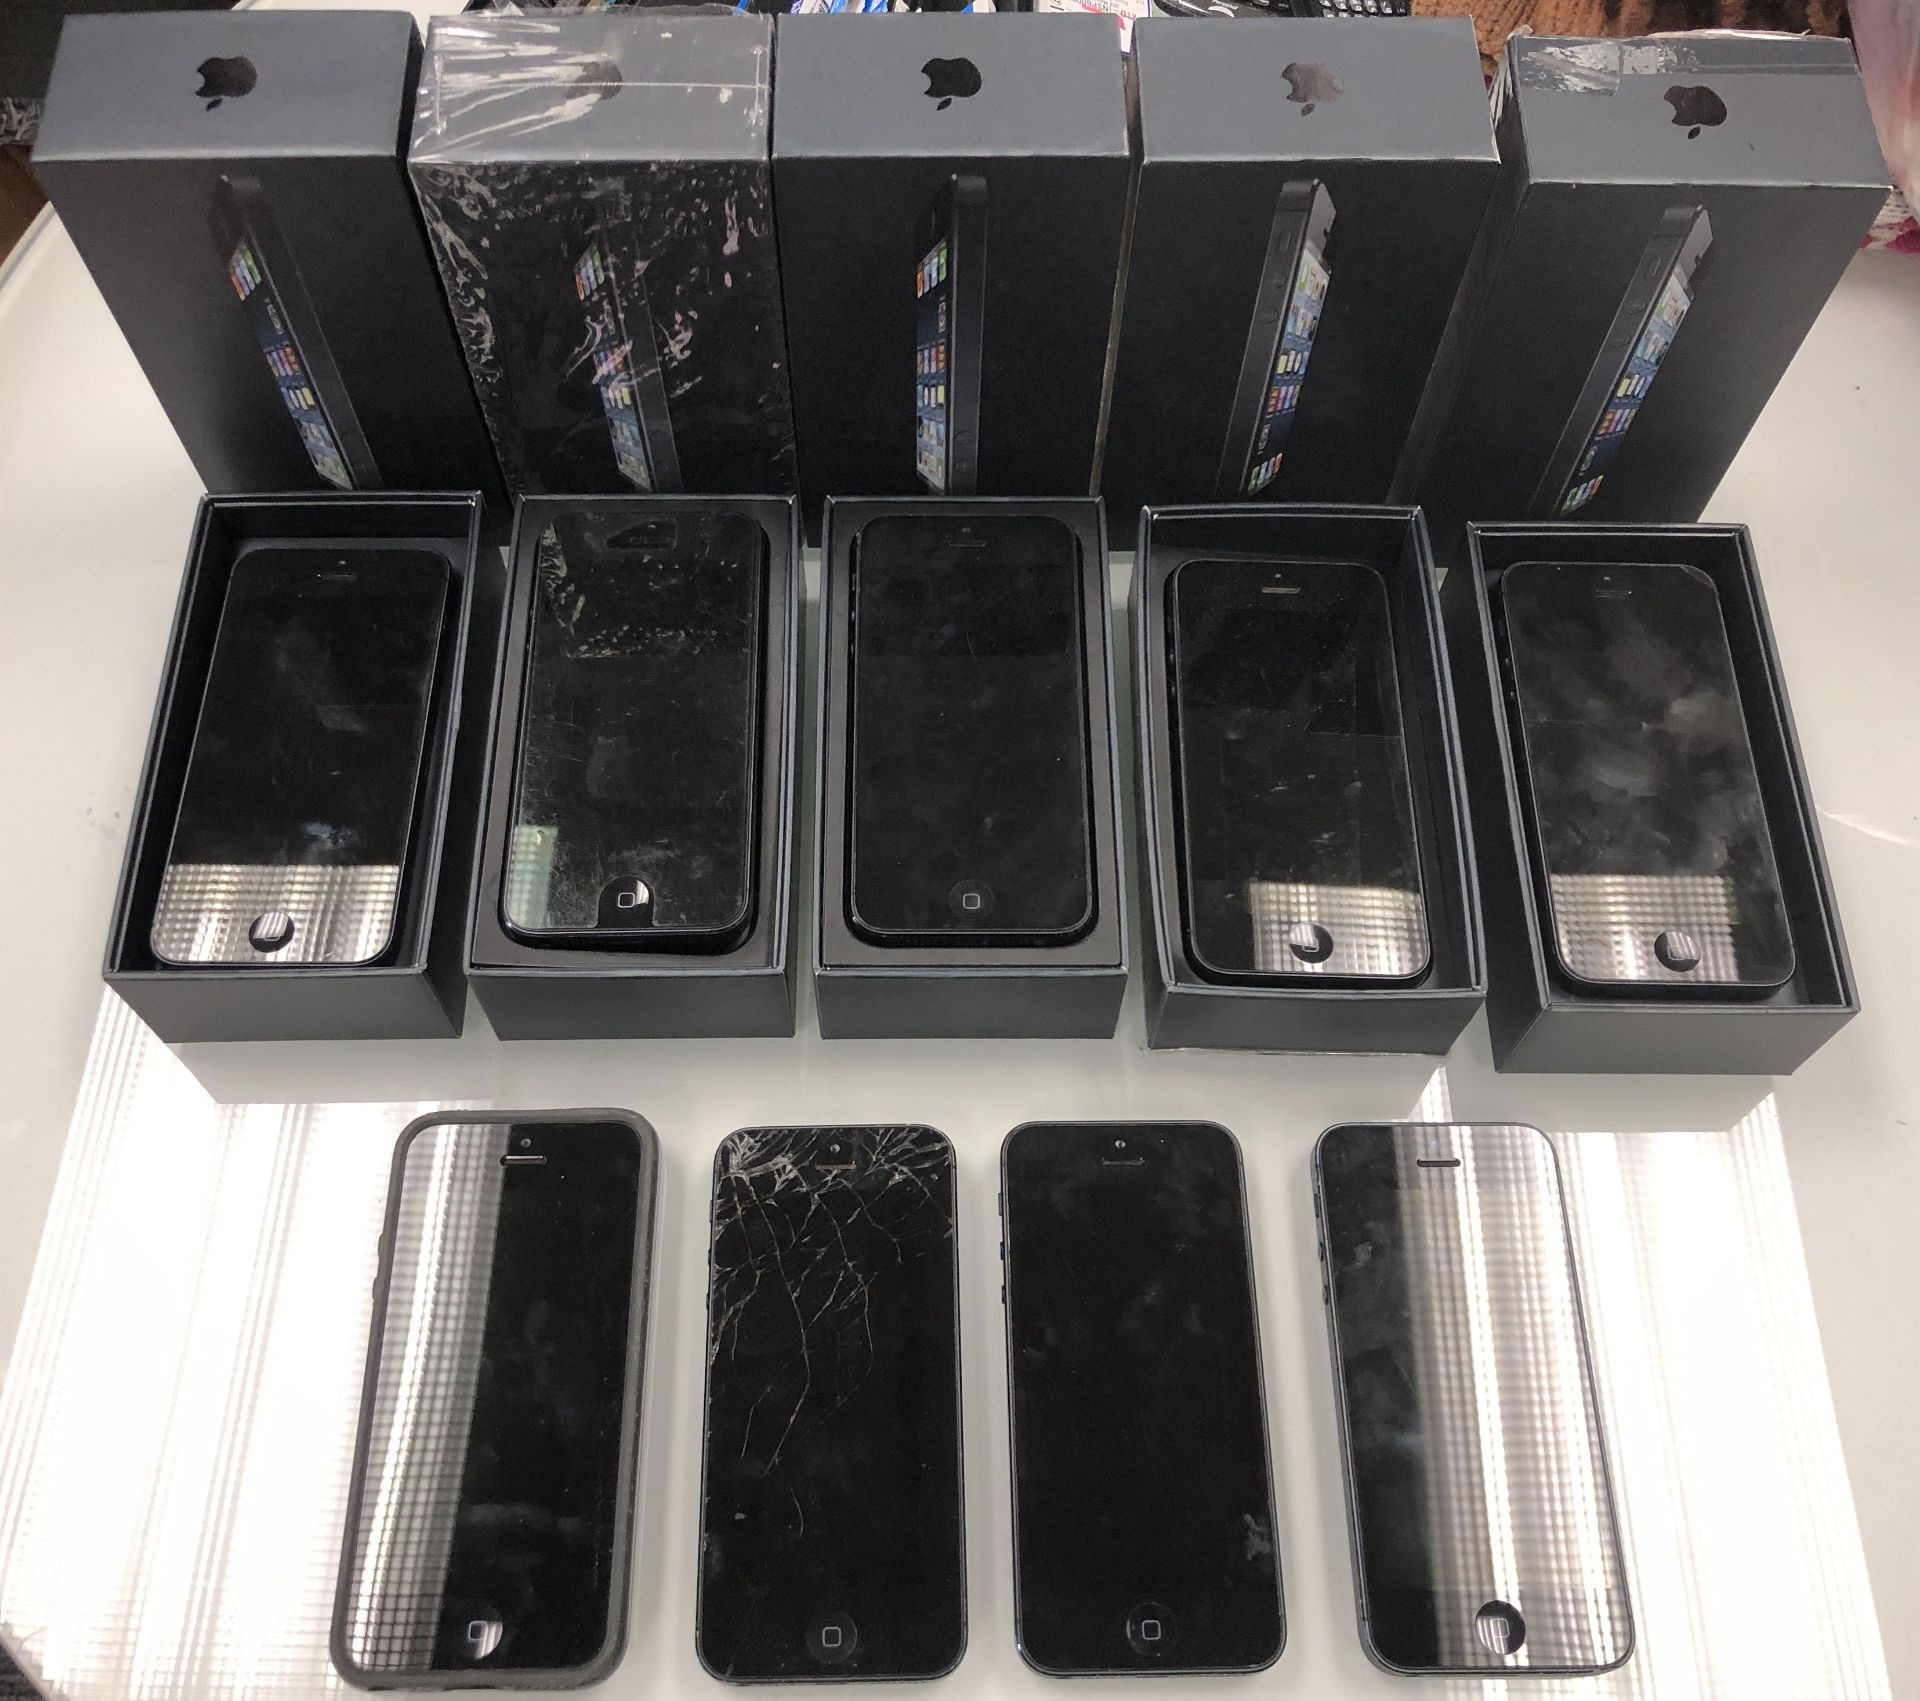 9 X IPHONE 5 IN ORIGINAL BOXES , ALL WORK, A FEW CRACKED AND LOCKED